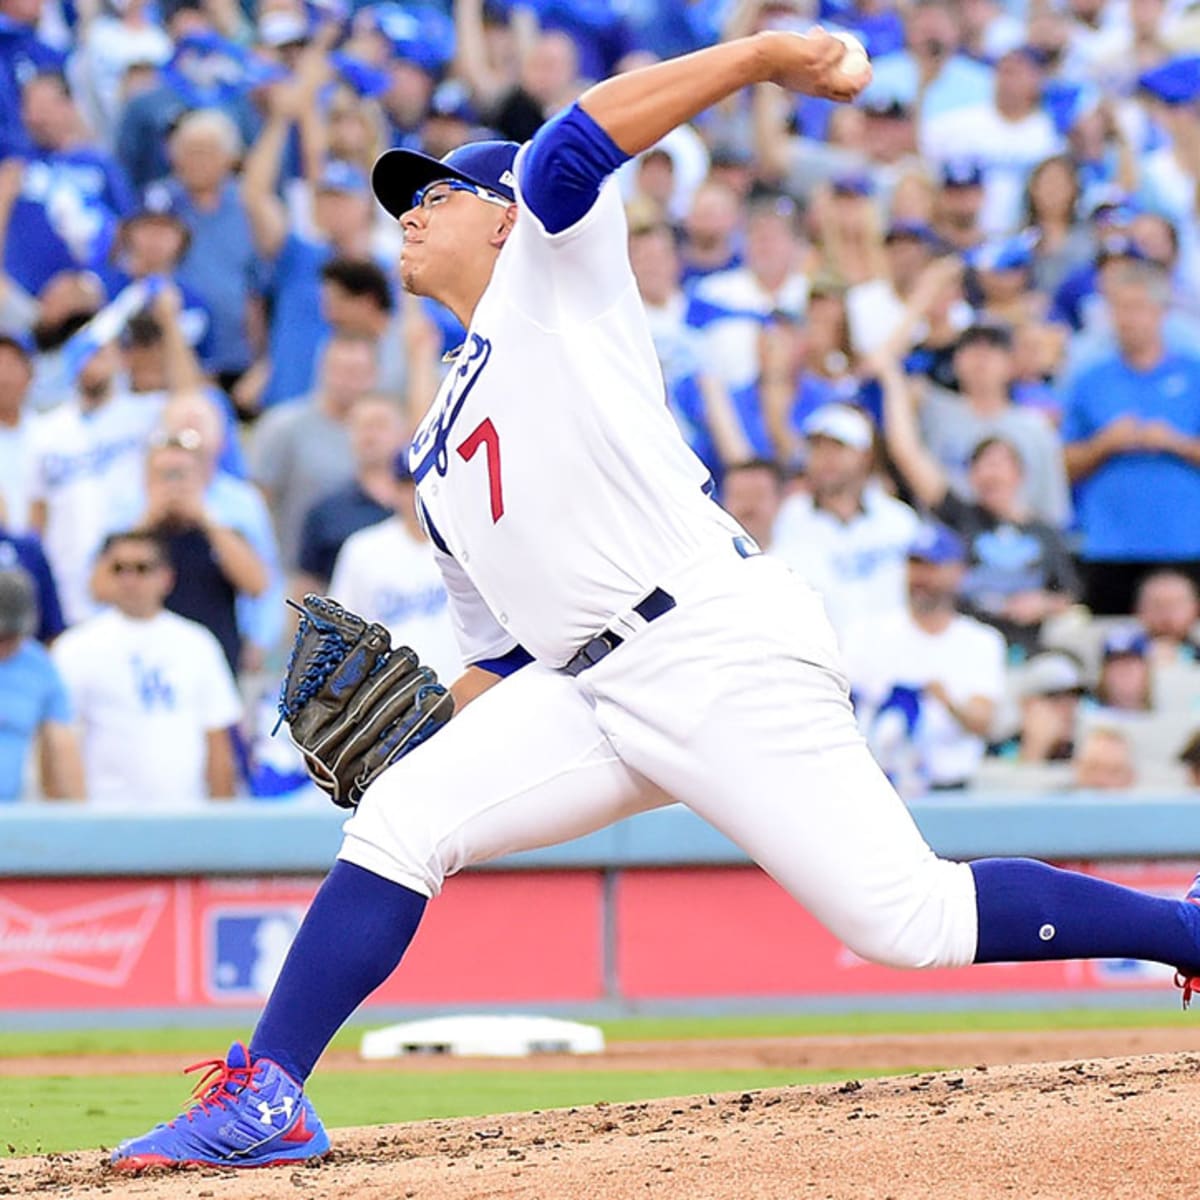 Julio Urias finishes off Dodgers' bullpen game in style